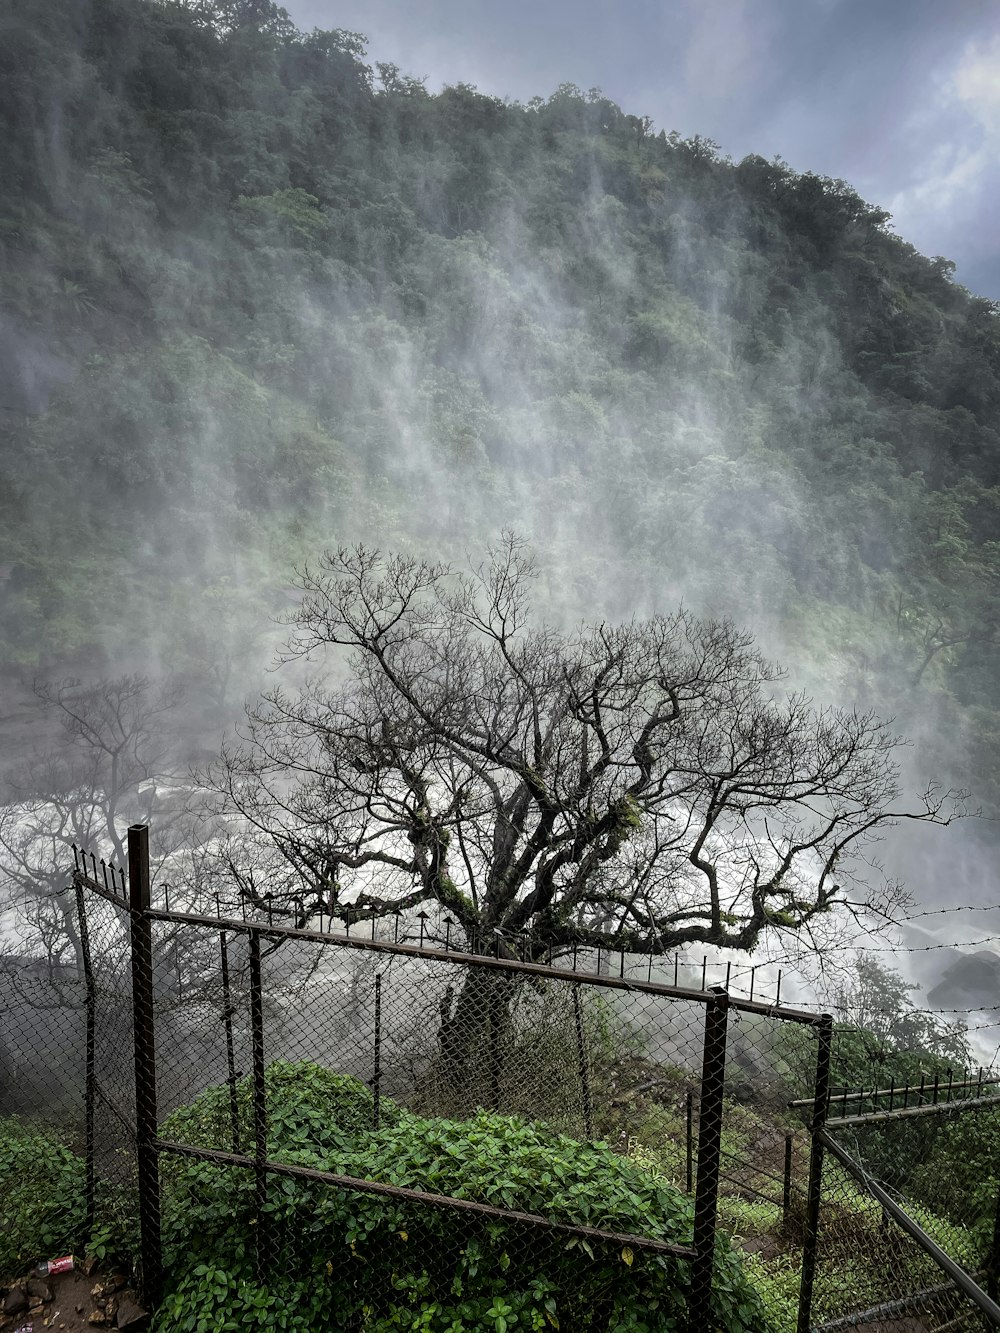 a tree in front of a large waterfall